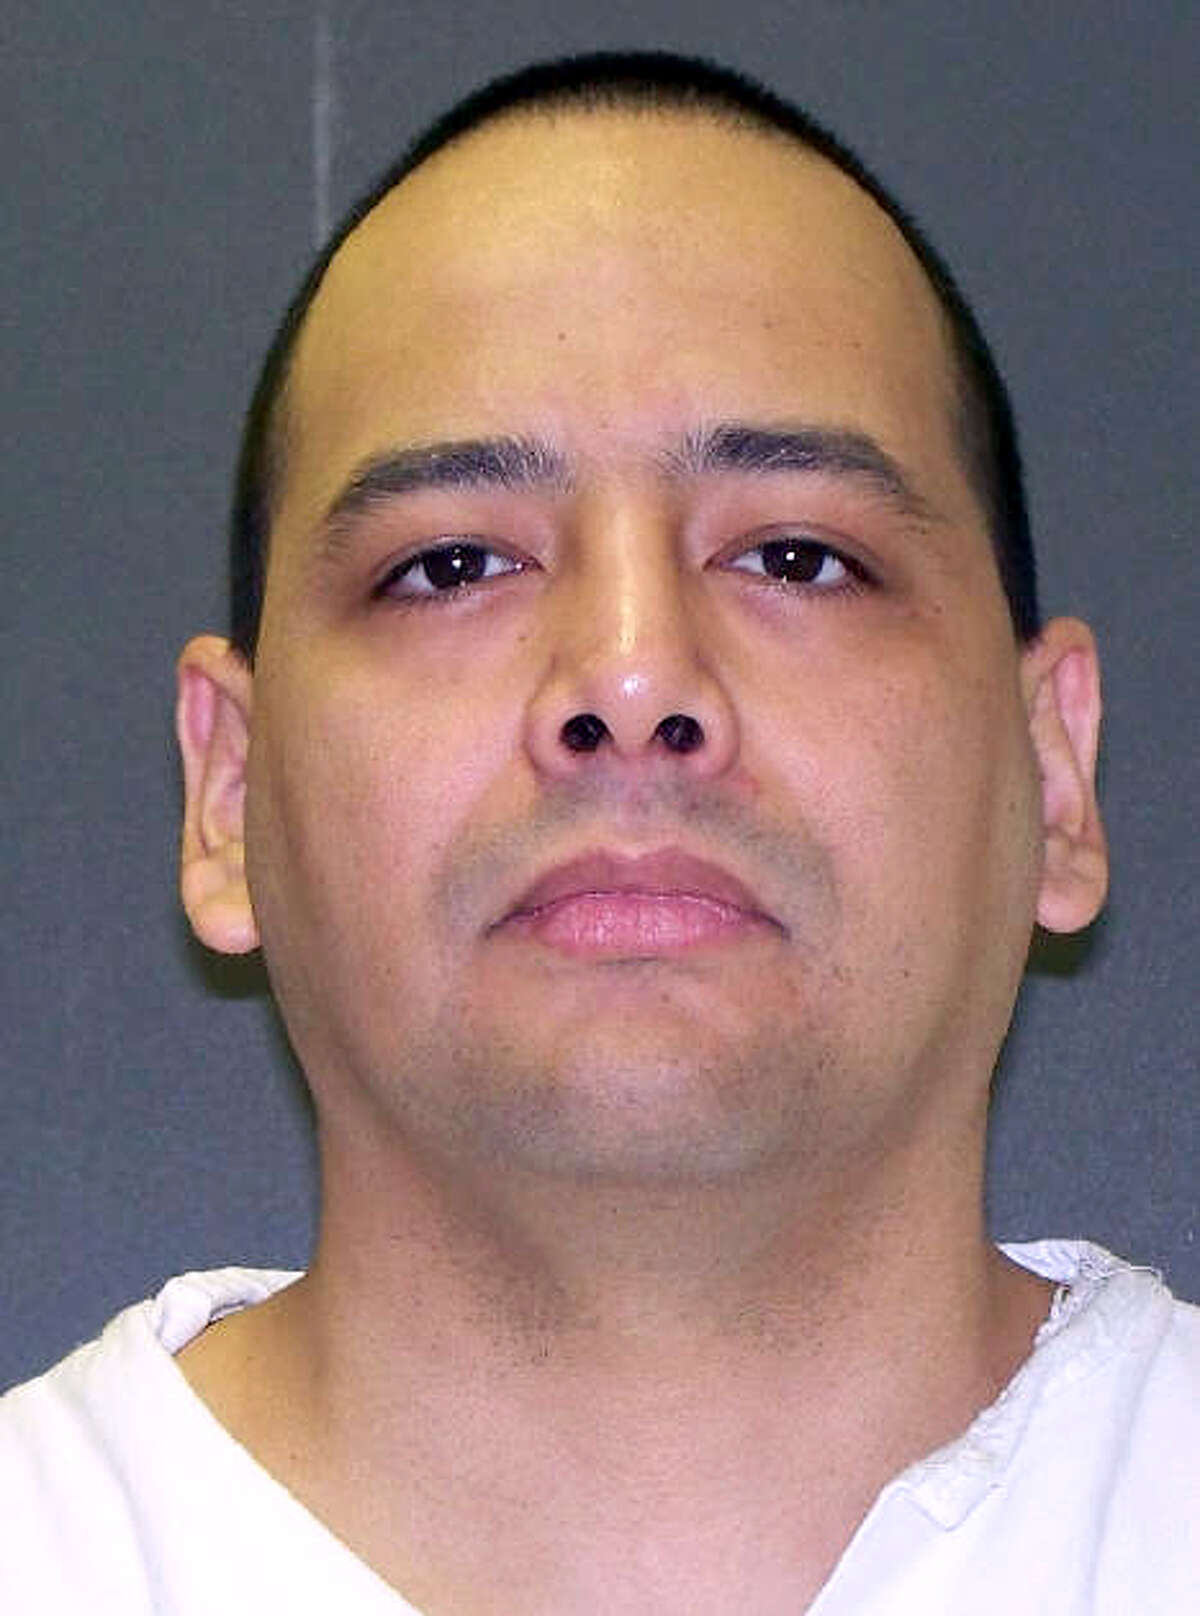 Arnold Prieto Age entered death row: 21Execution: Jan. 21, 2015Summary: Prieto was convicted of robbing and stabbing and killing three elderly people, including his great- uncle and aunt.